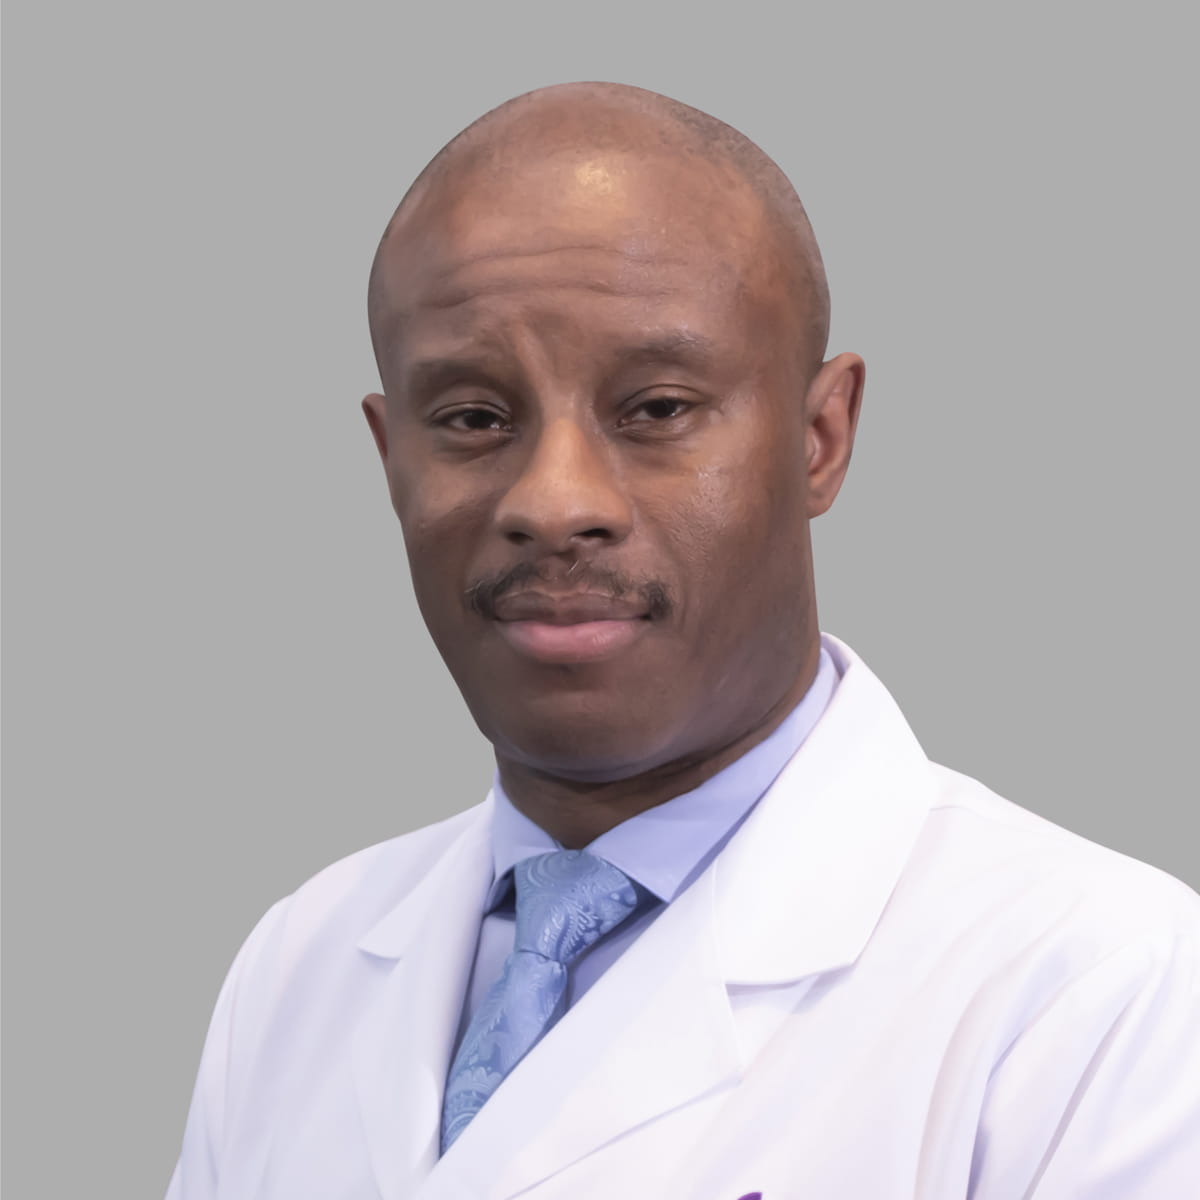 A friendly image of Roderick Rhyant, MD